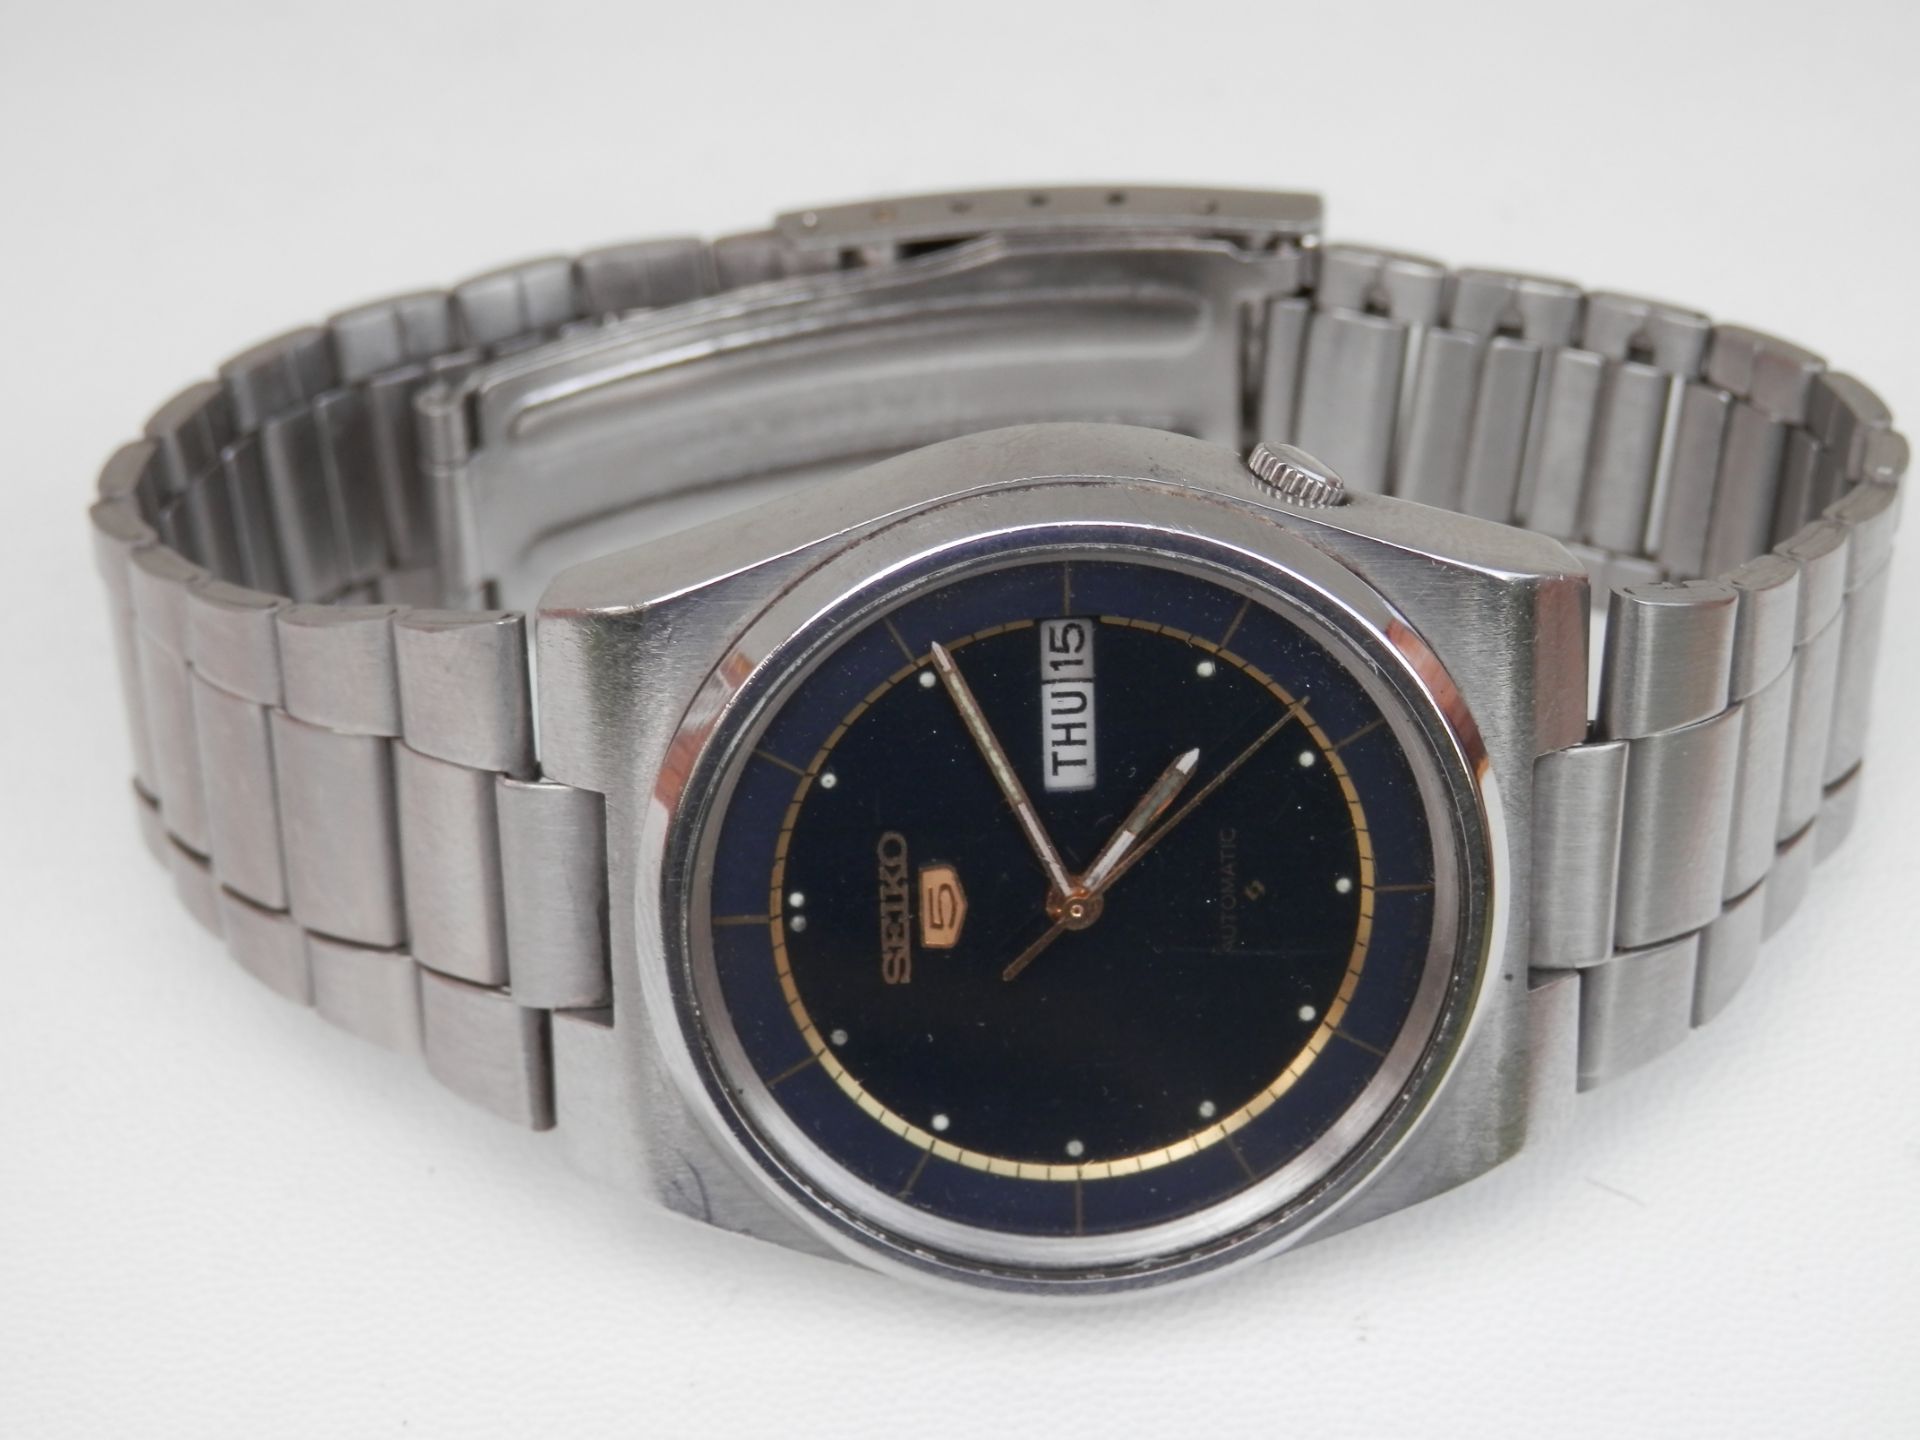 GENTS VINTAGE 1979 SEIKO 5 AUTOMATIC 17 JEWEL DAY/DATE MECHANICAL WATCH. METALLIC BLUE DIAL. - Image 3 of 11